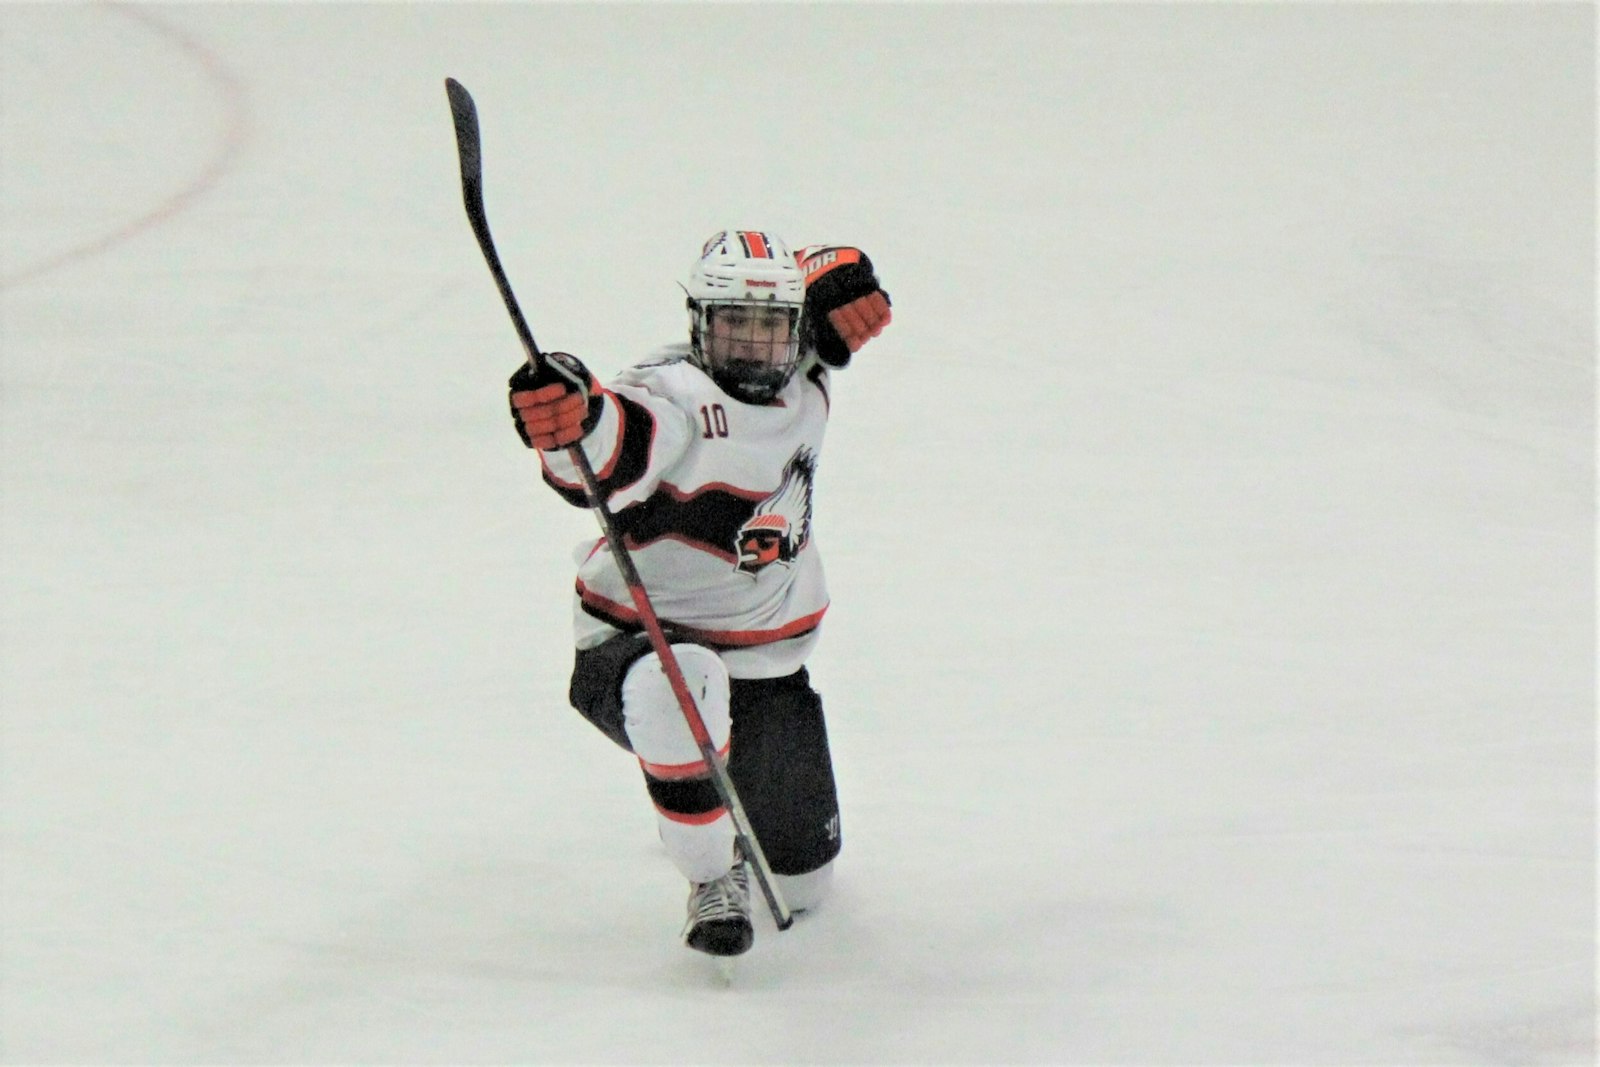 Peter Rosa celebrates his short-handed goal, putting Brother Rice on the scoreboard early in the third period. Rosa would go on to score two more times, leading the Warriors to a 4-2 victory.